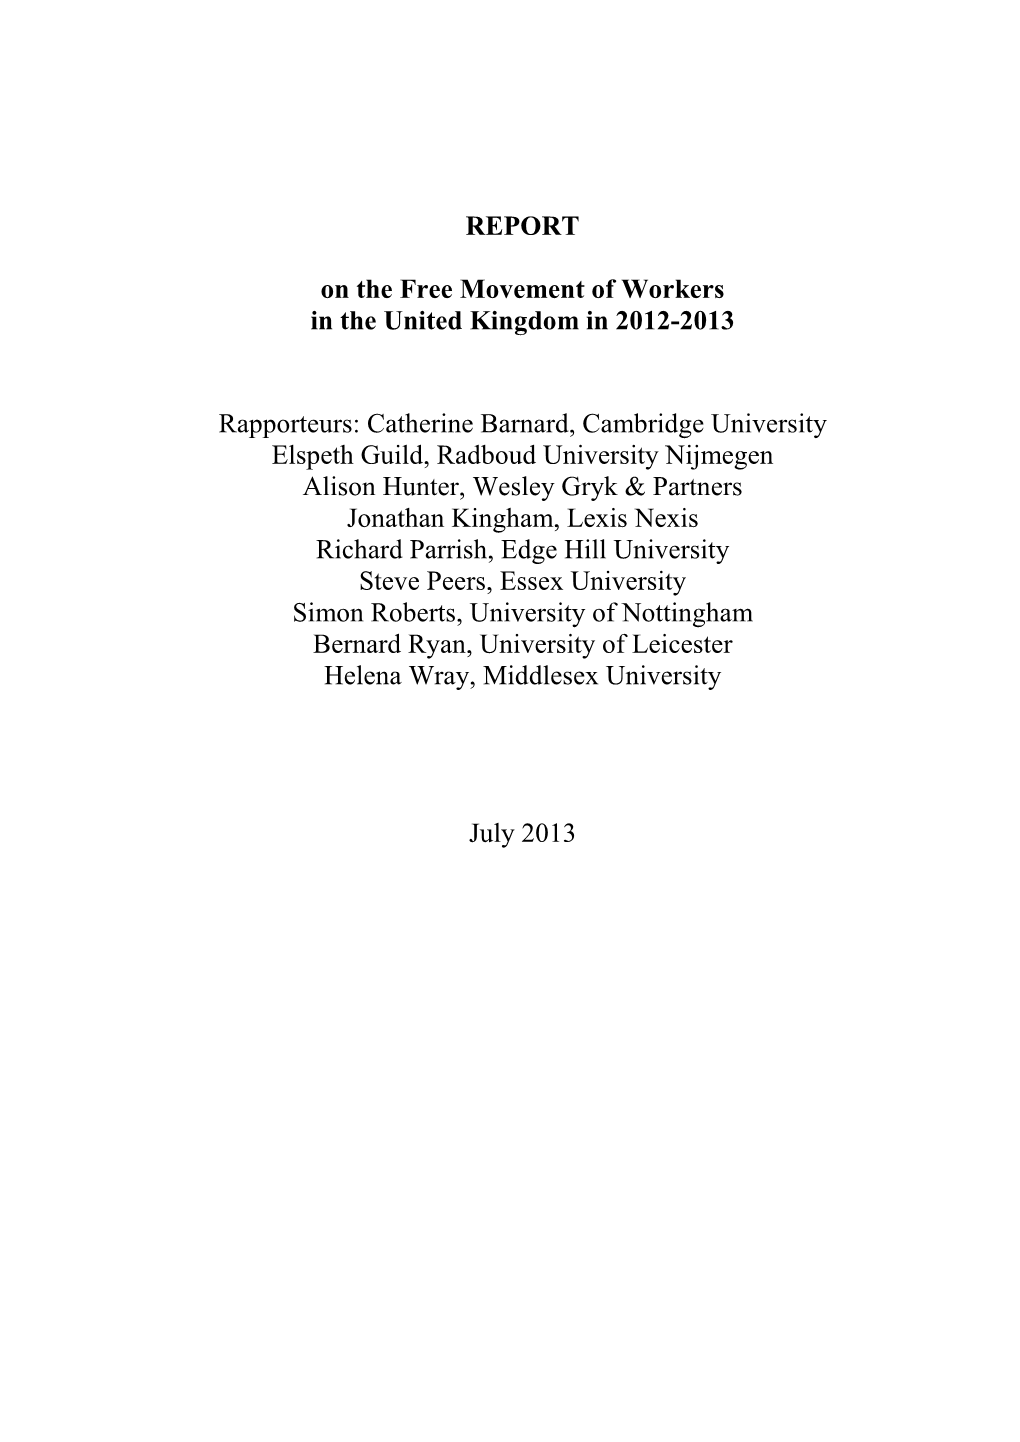 REPORT on the Free Movement of Workers in the United Kingdom in 2012-2013 Rapporteurs: Catherine Barnard, Cambridge University E